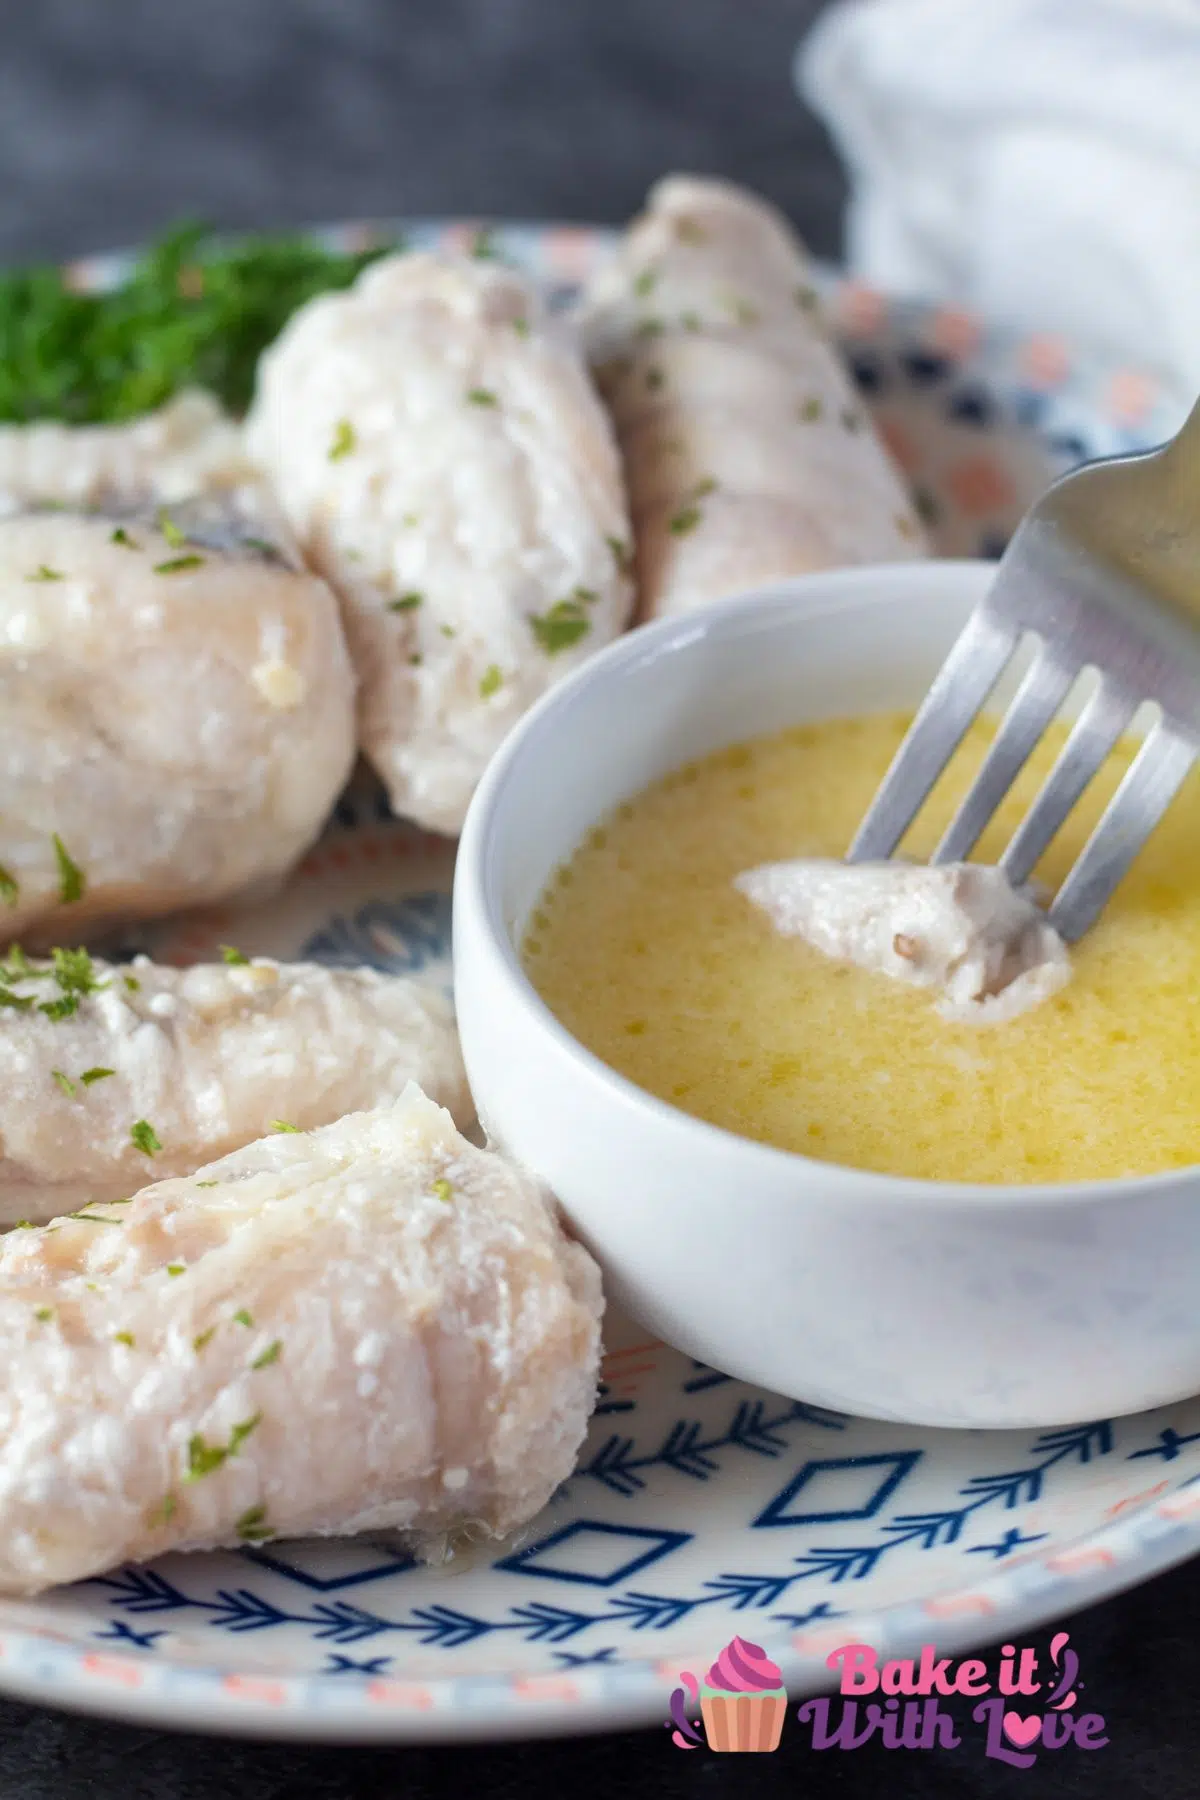 Tall image of butter poached monkfish on a plate, dipping a piece of monkfish into drawn butter.